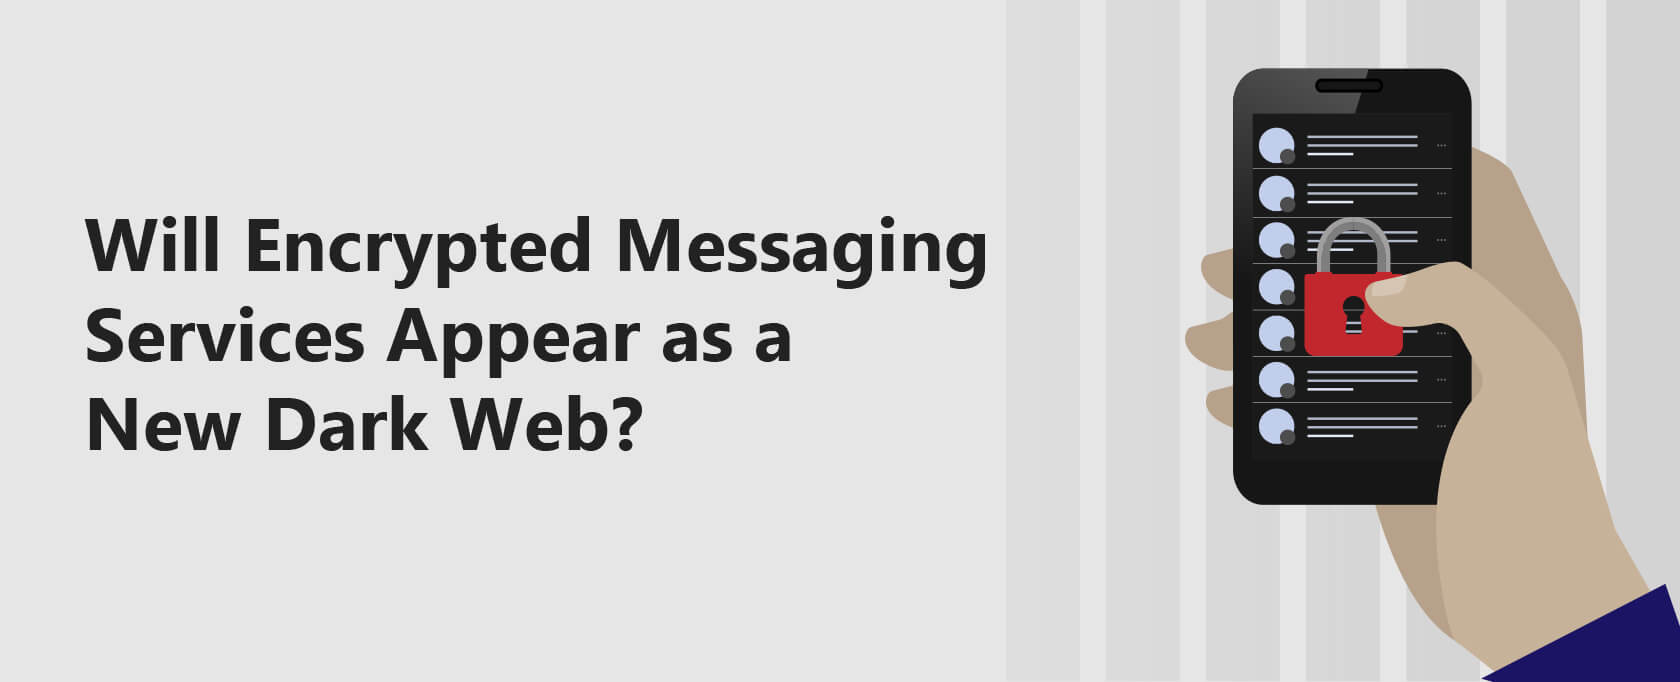 Encrypted Messaging and Dark Web